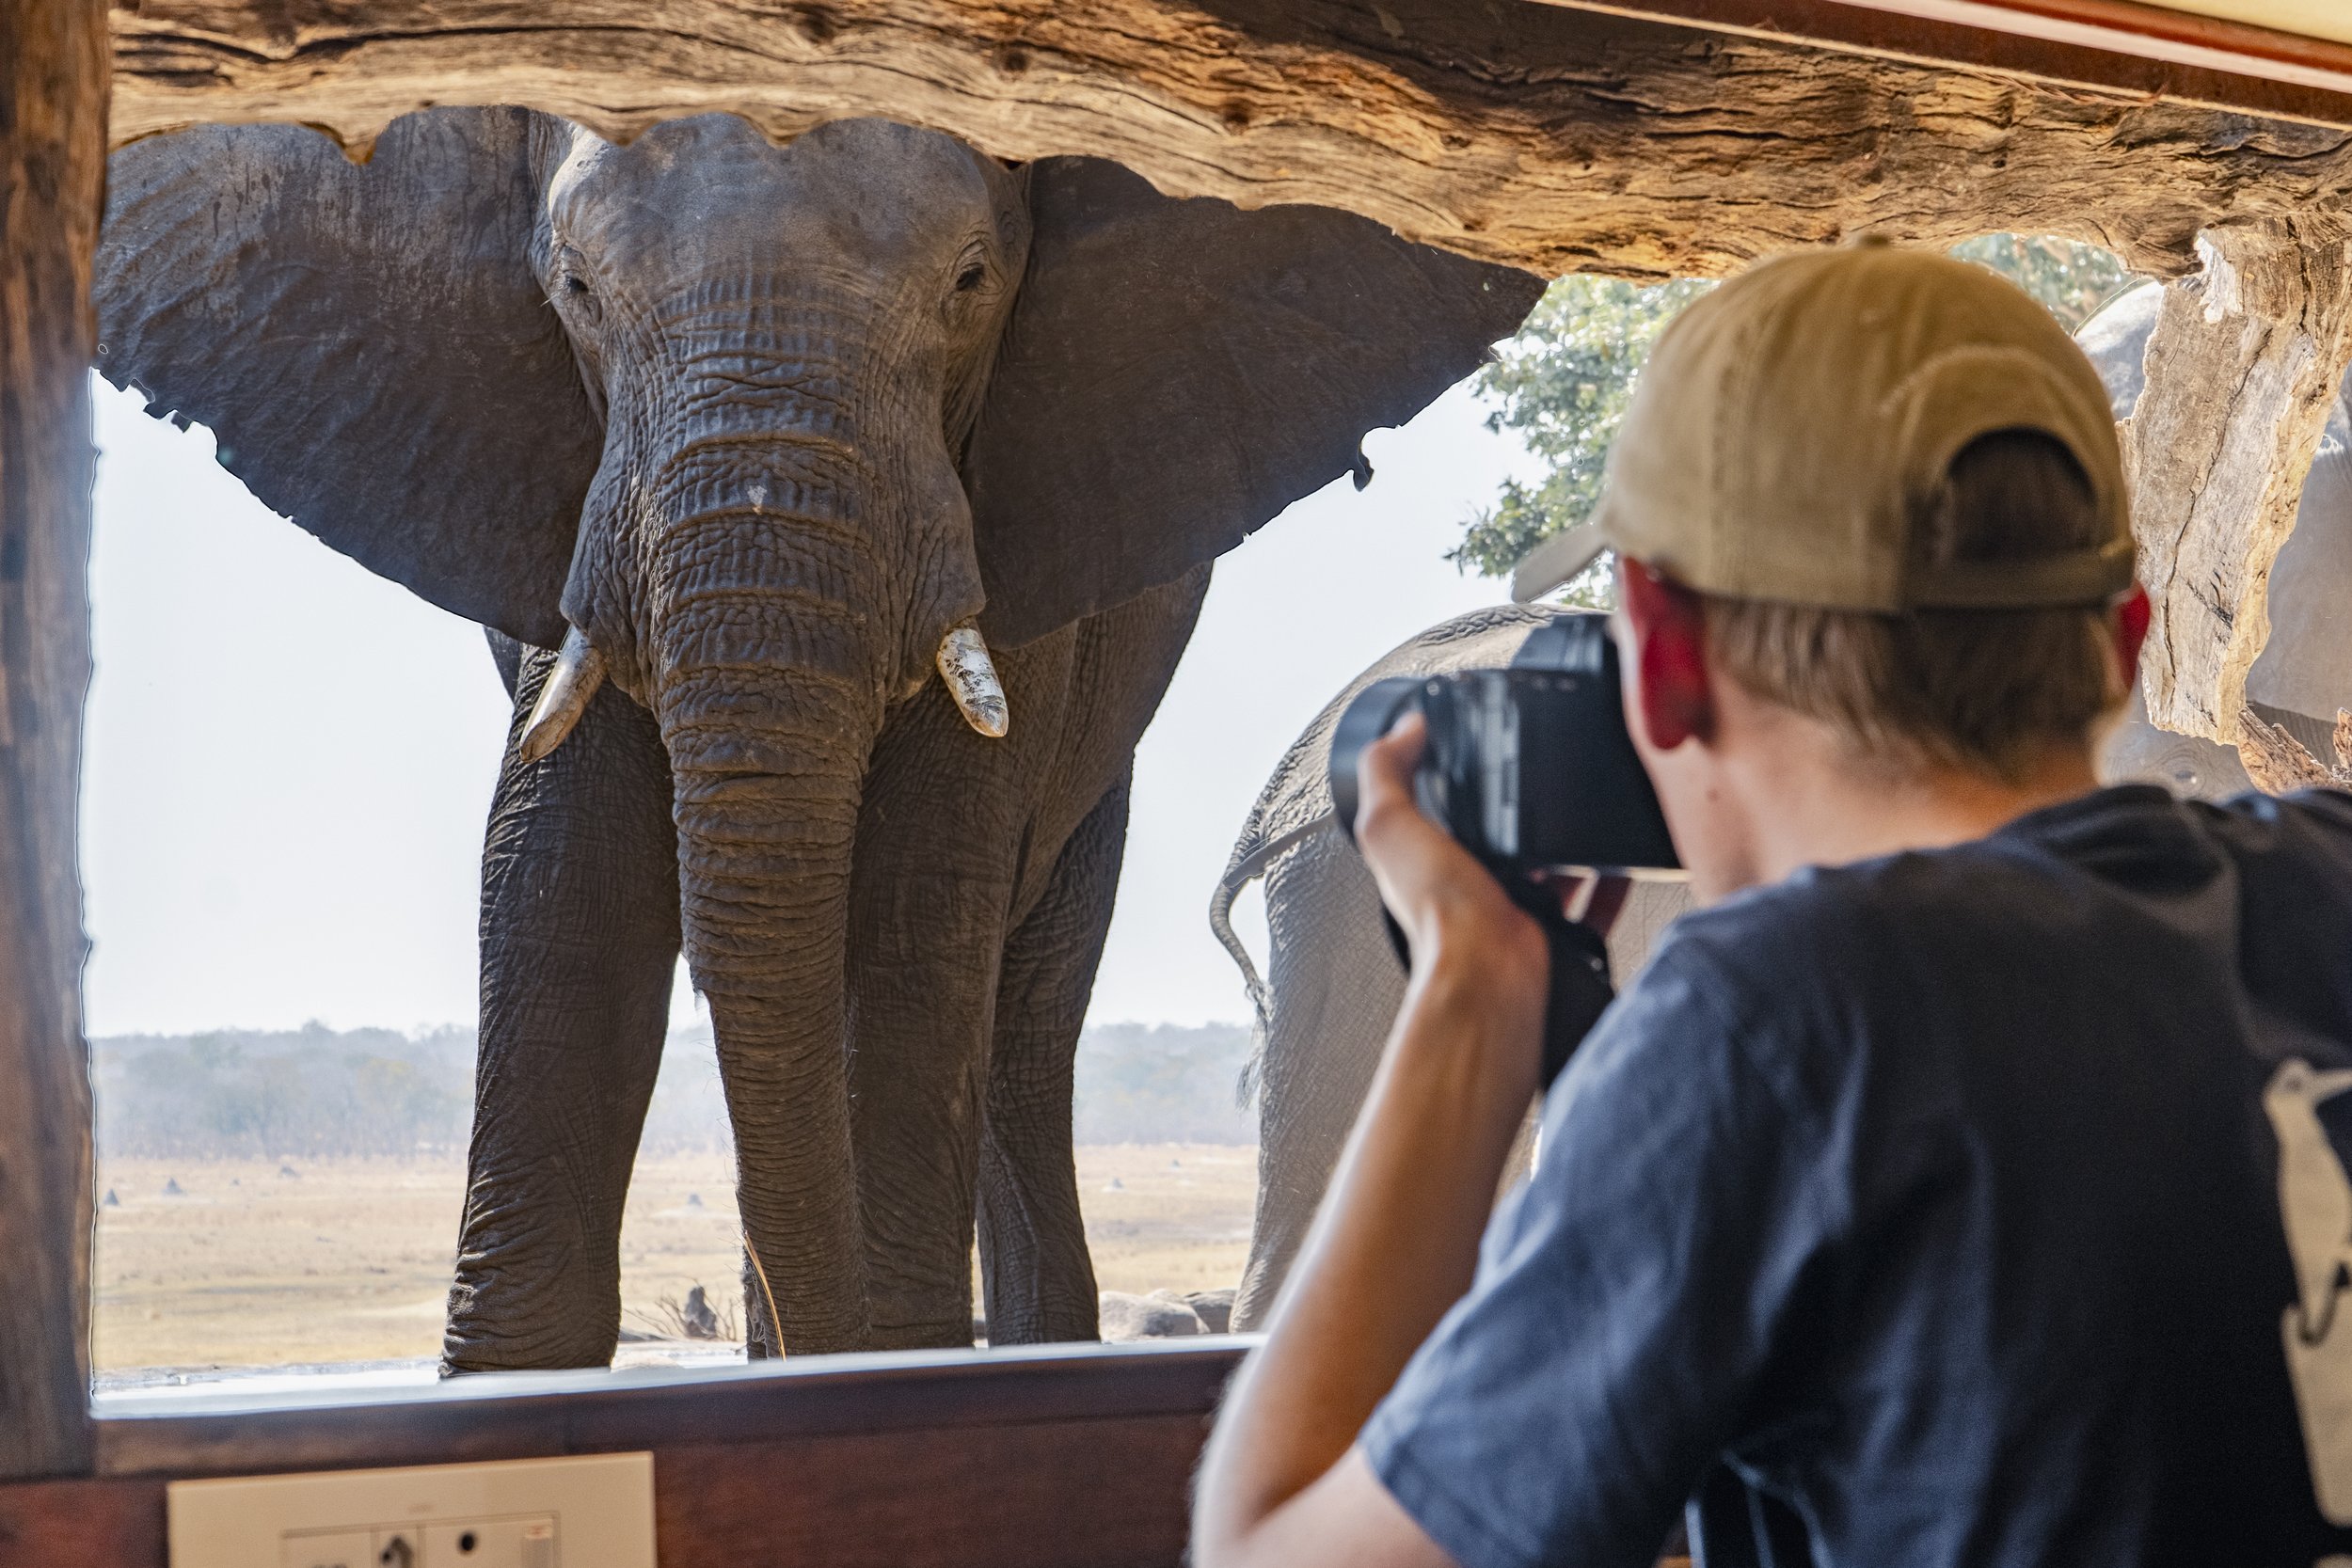 A man taking photos of the elephant.